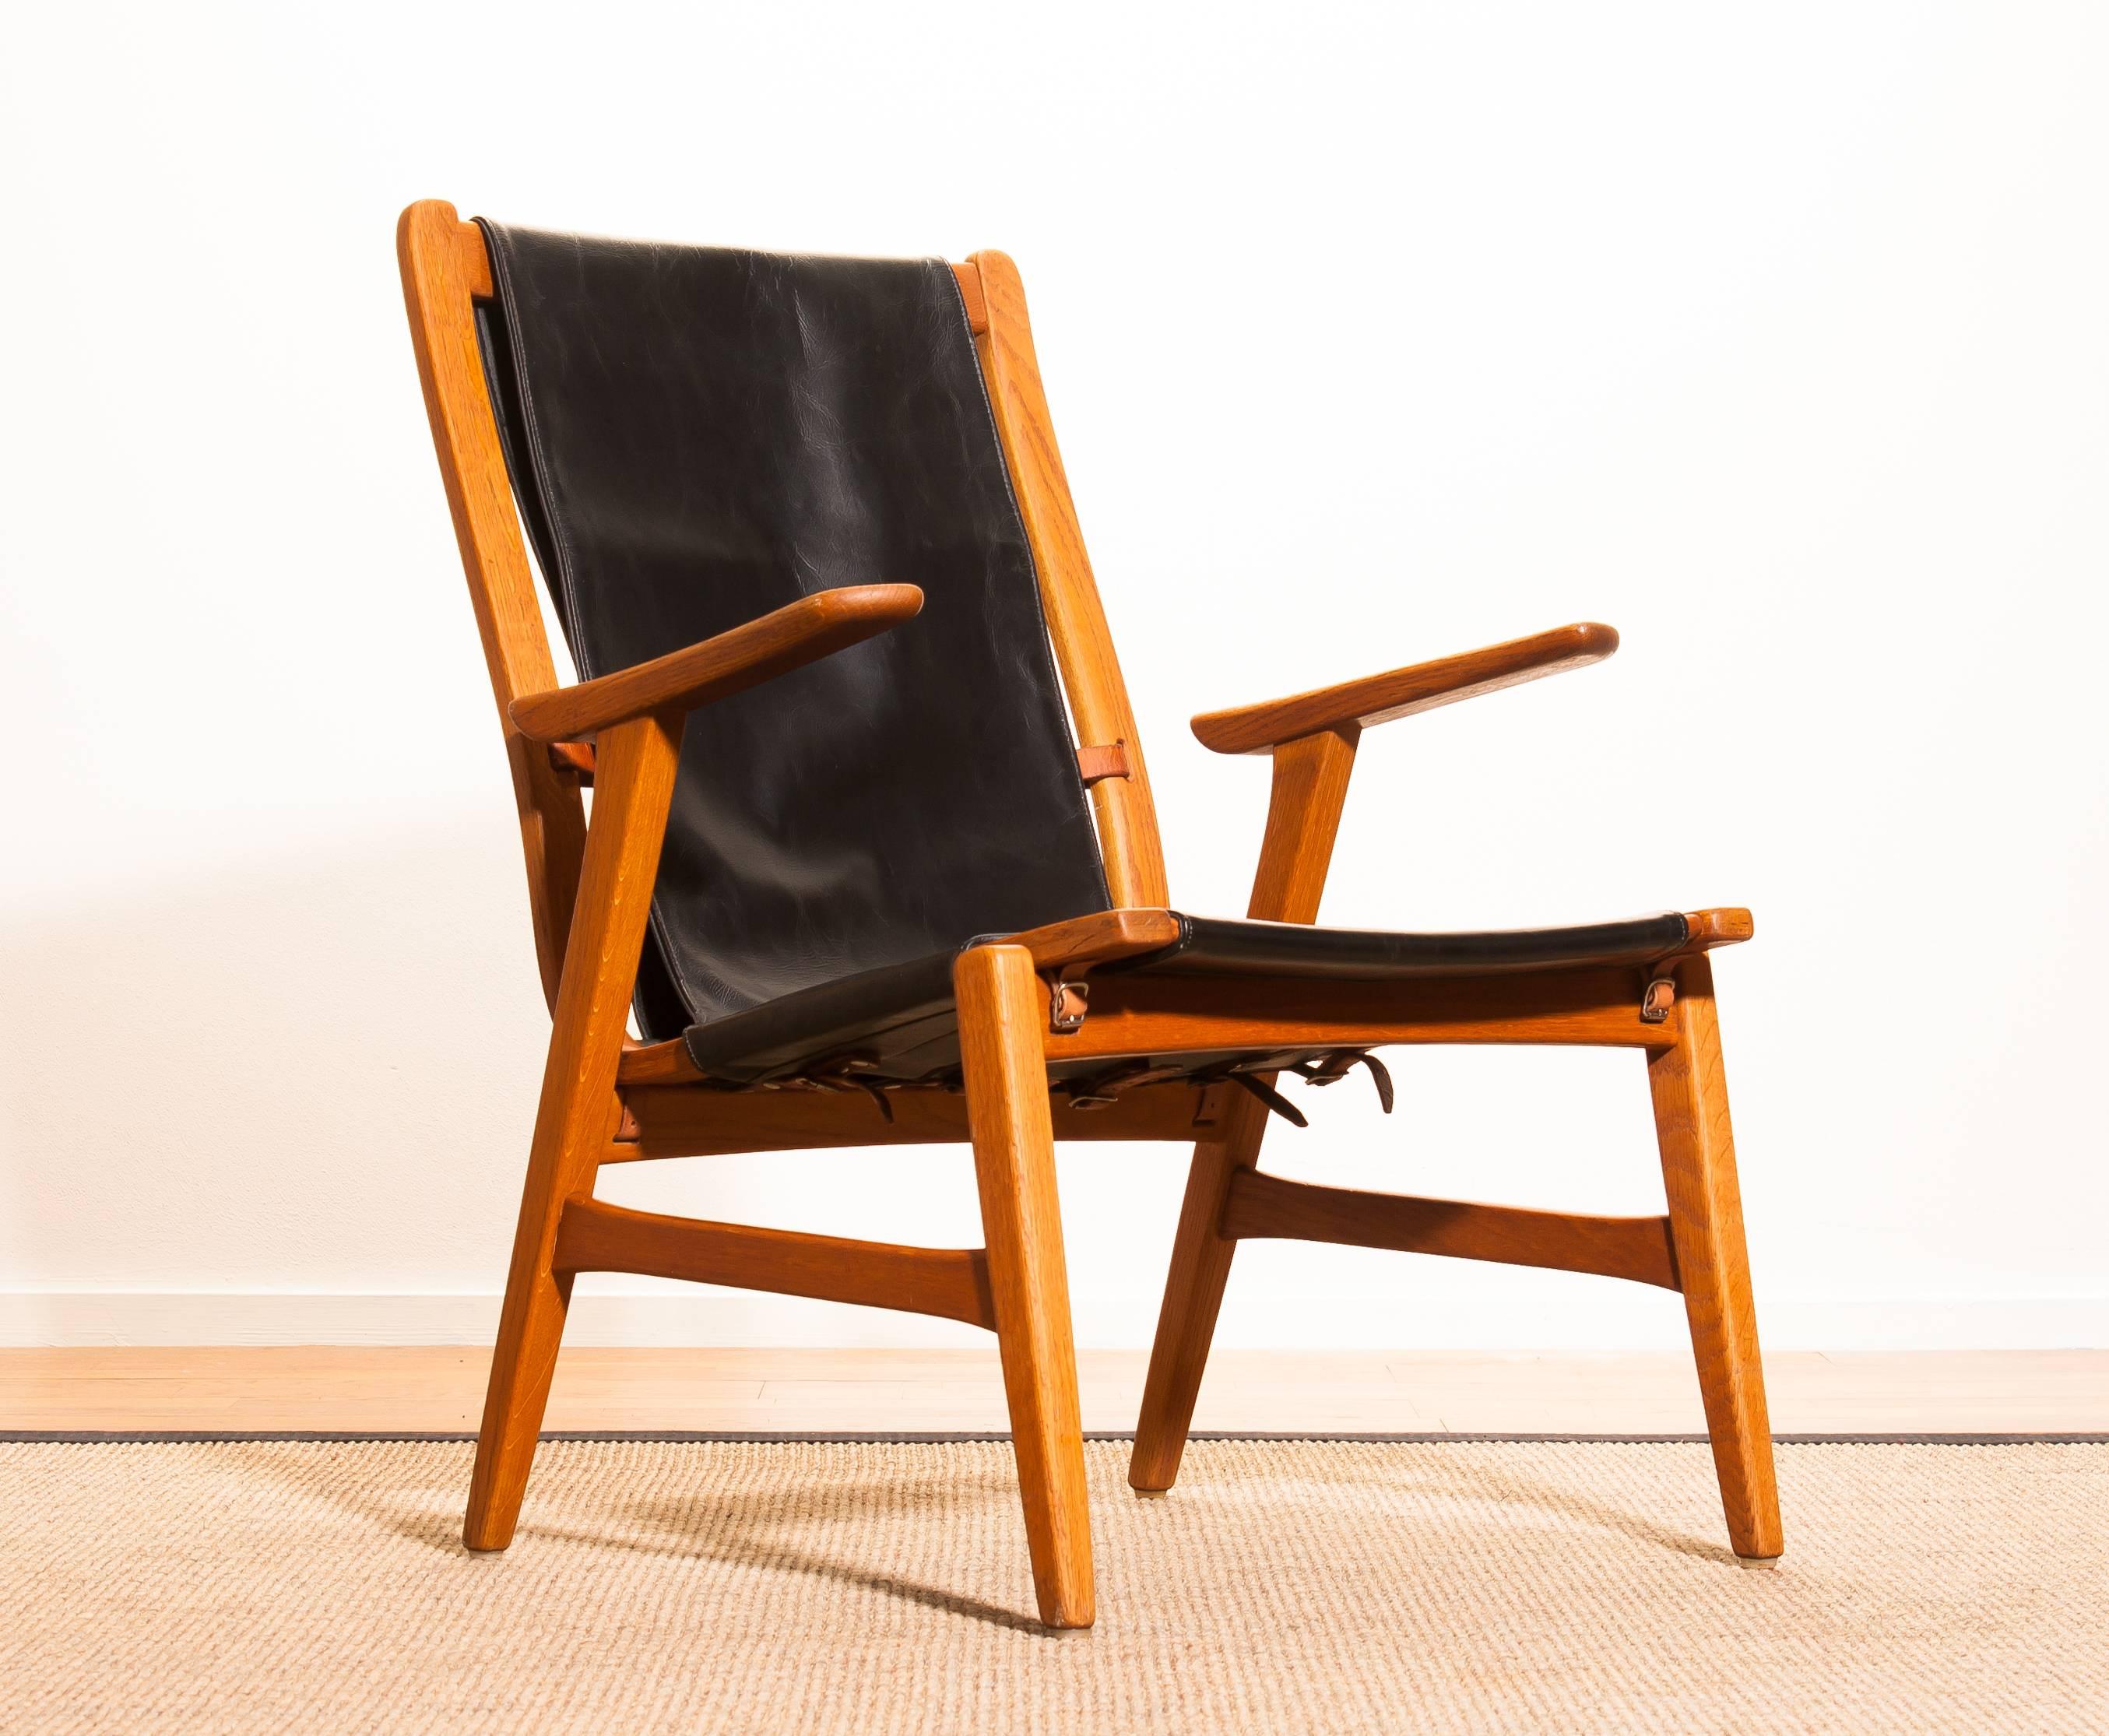 Wonderful hunting chair 'Ulrika' designed by Östen Kristansson for Vittsjö, Sweden.
This beautiful chair is made of an oak frame with a black leather seating.
It is in a very nice condition.
Period 1950s.
Dimensions: H 82 cm, W 62 cm, D 60 cm,